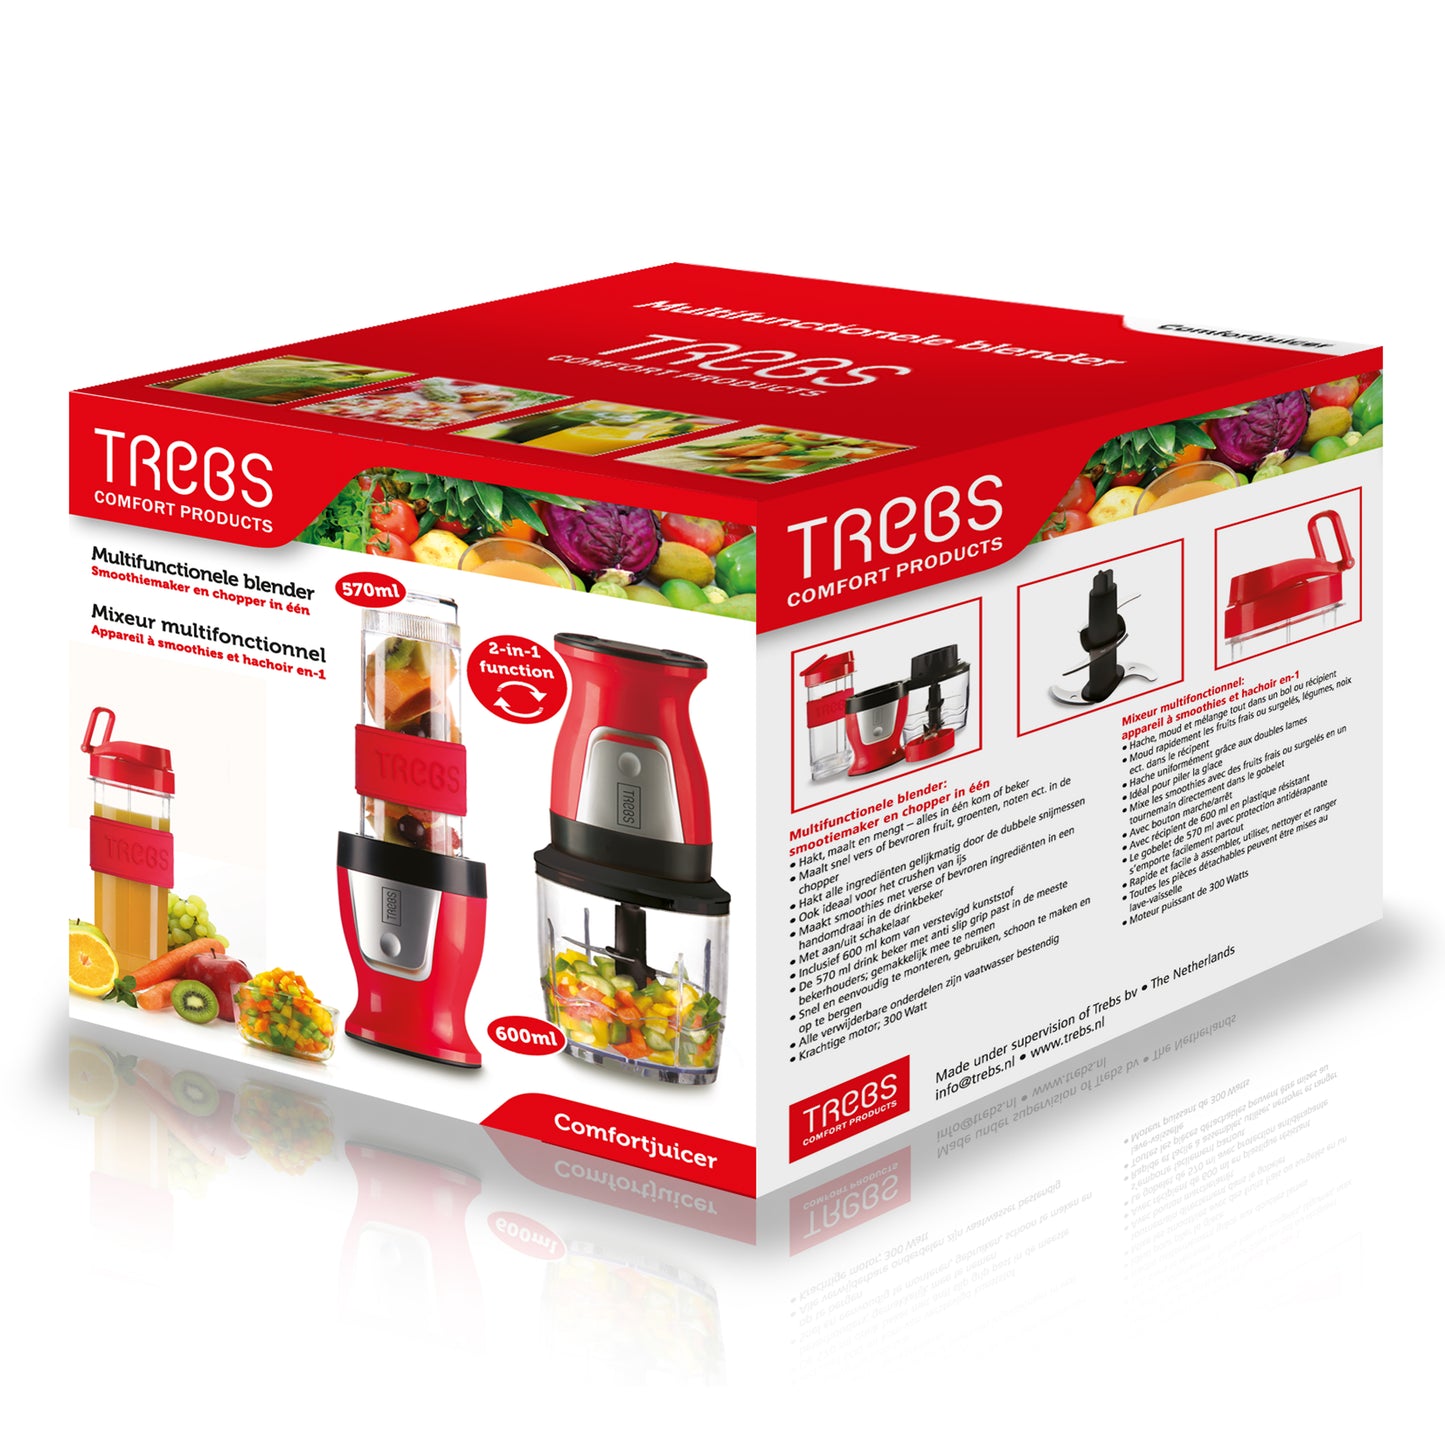 Trebs 99336 - Smoothie Maker and Chopper in one / Comfortjuicer with accessories